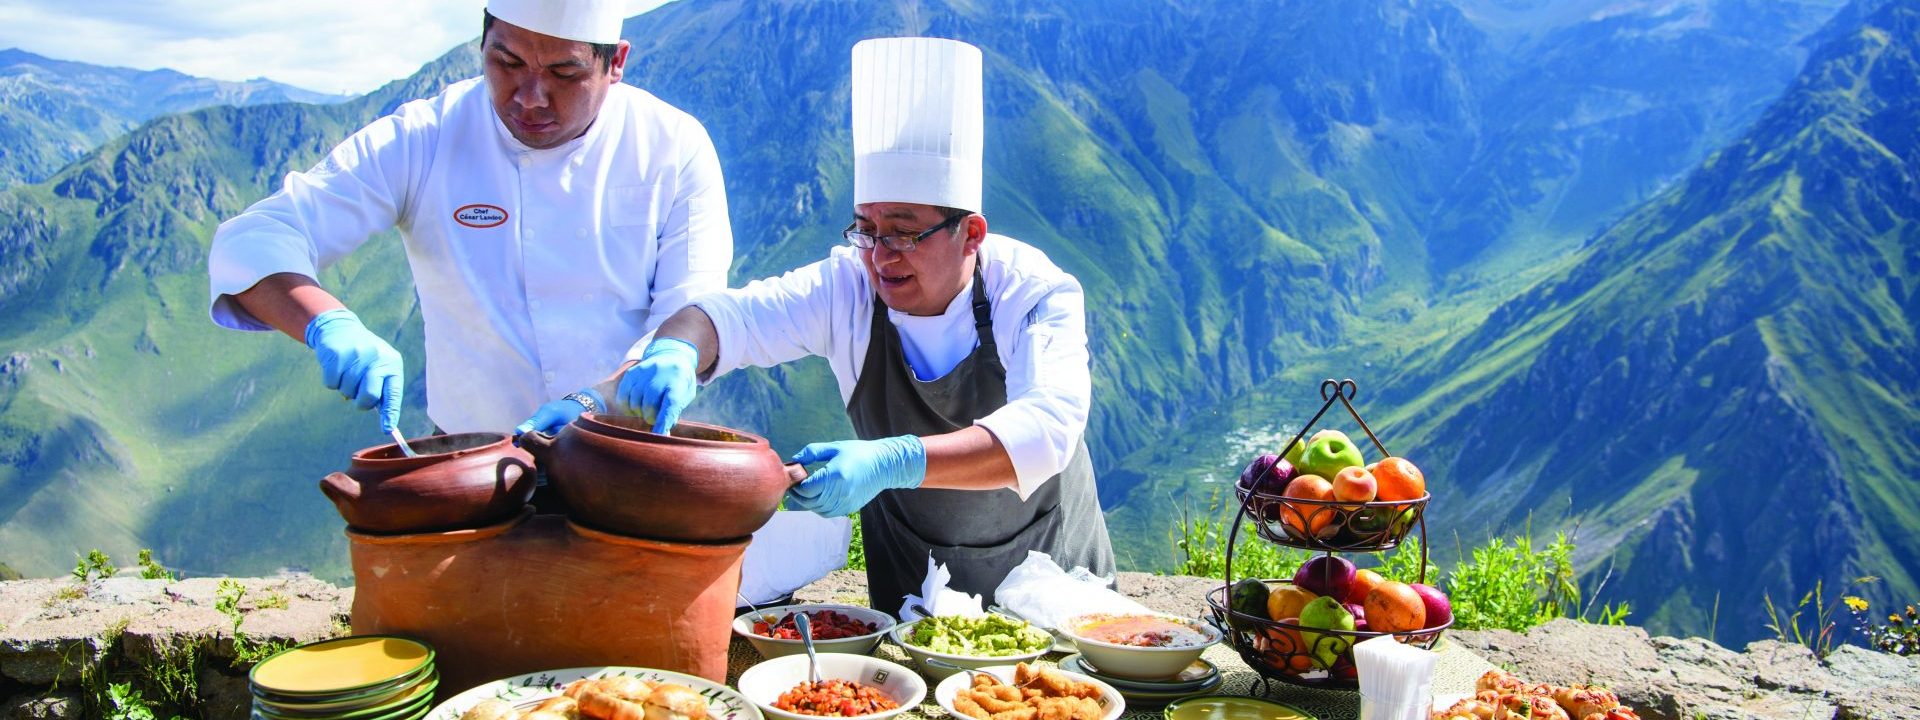 Sink your teeth into these gourmet gastronomic getaways with Belmond hotels